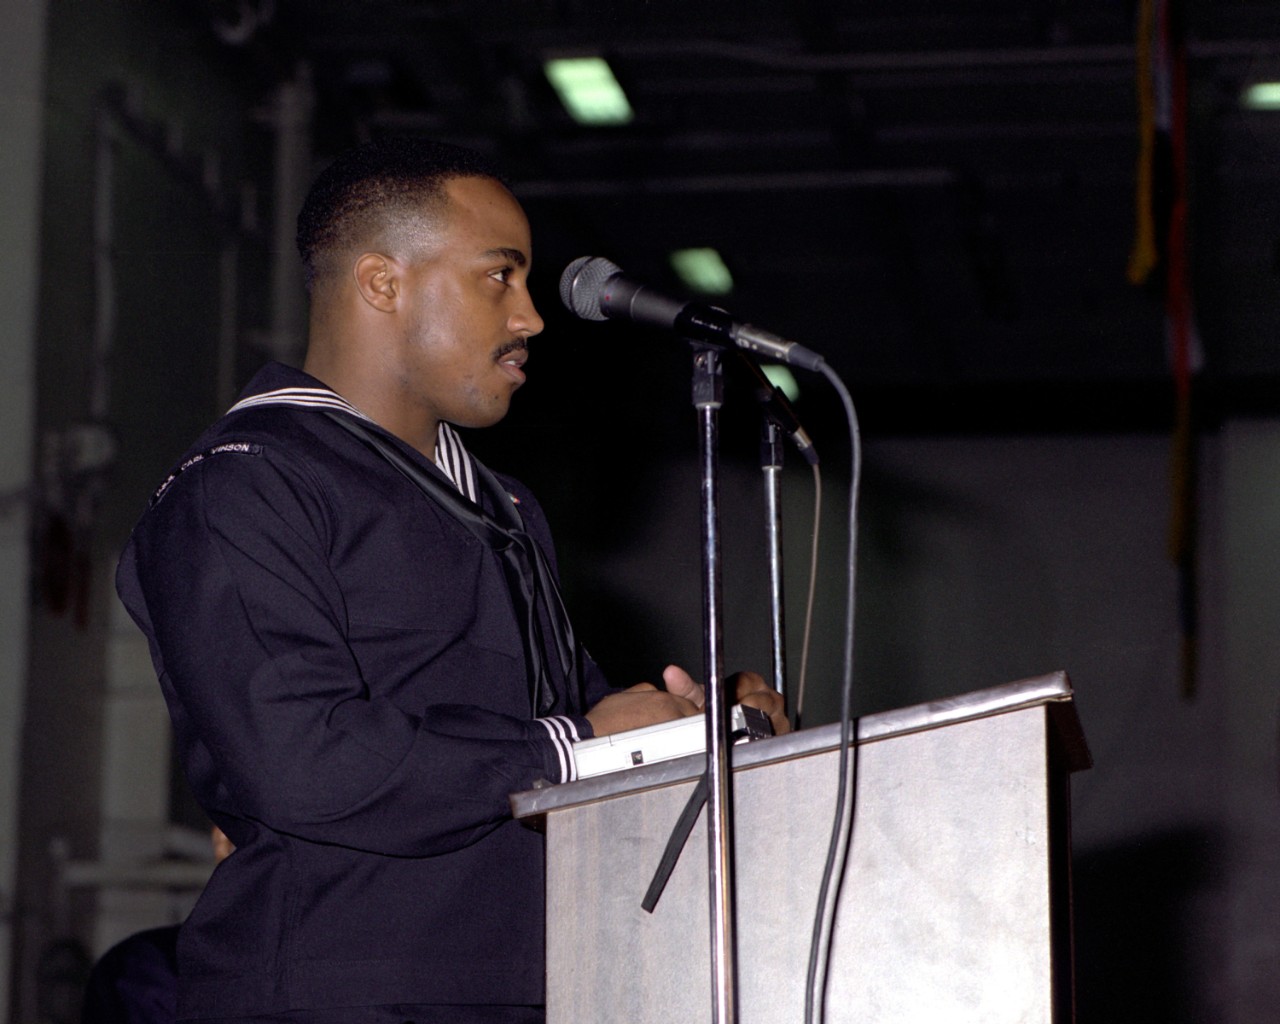 330-CFD-DN-SC-86-10322:   Black History Week, February 1986.   A U.S. Navy Sailor addressed crew members and guests during a Black History Week celebration onboard USS Carl Vinson (CVN-70).   Photographed by PH2 C.F. Laws, February 20, 1986.   Official U.S. Navy Photograph, now in the collections of the National Archives.   